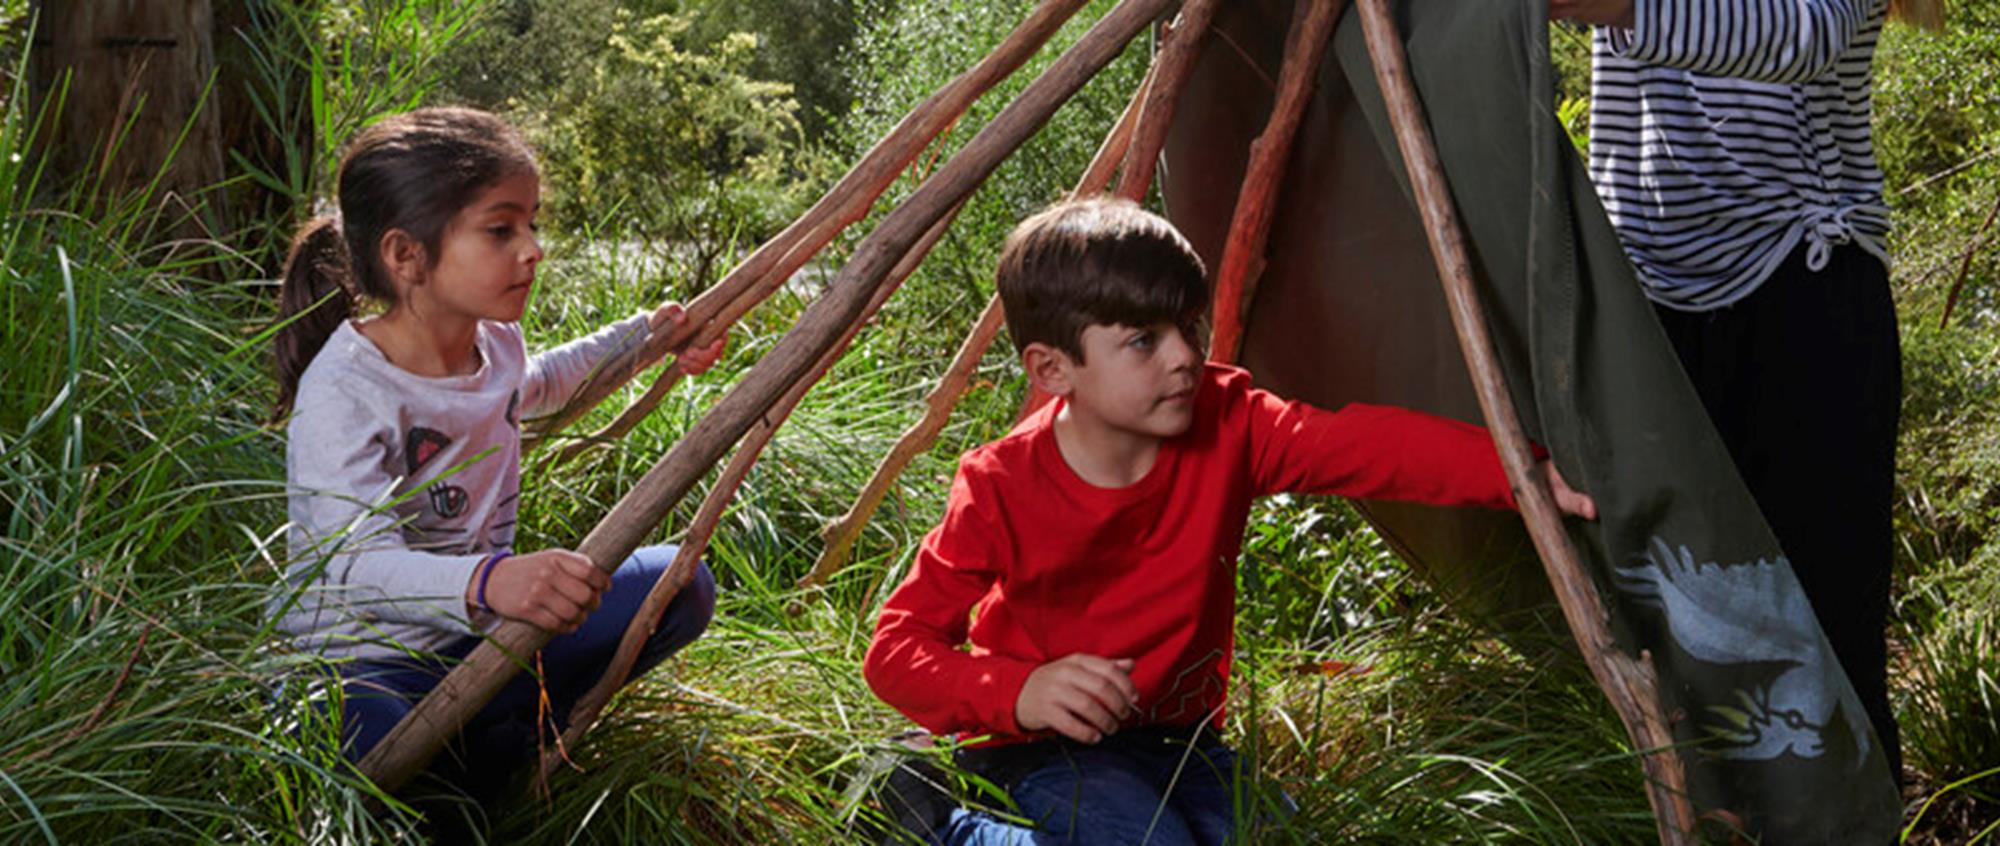 A young boy and girl build a gunyah shelter at Healesville Sanctuary